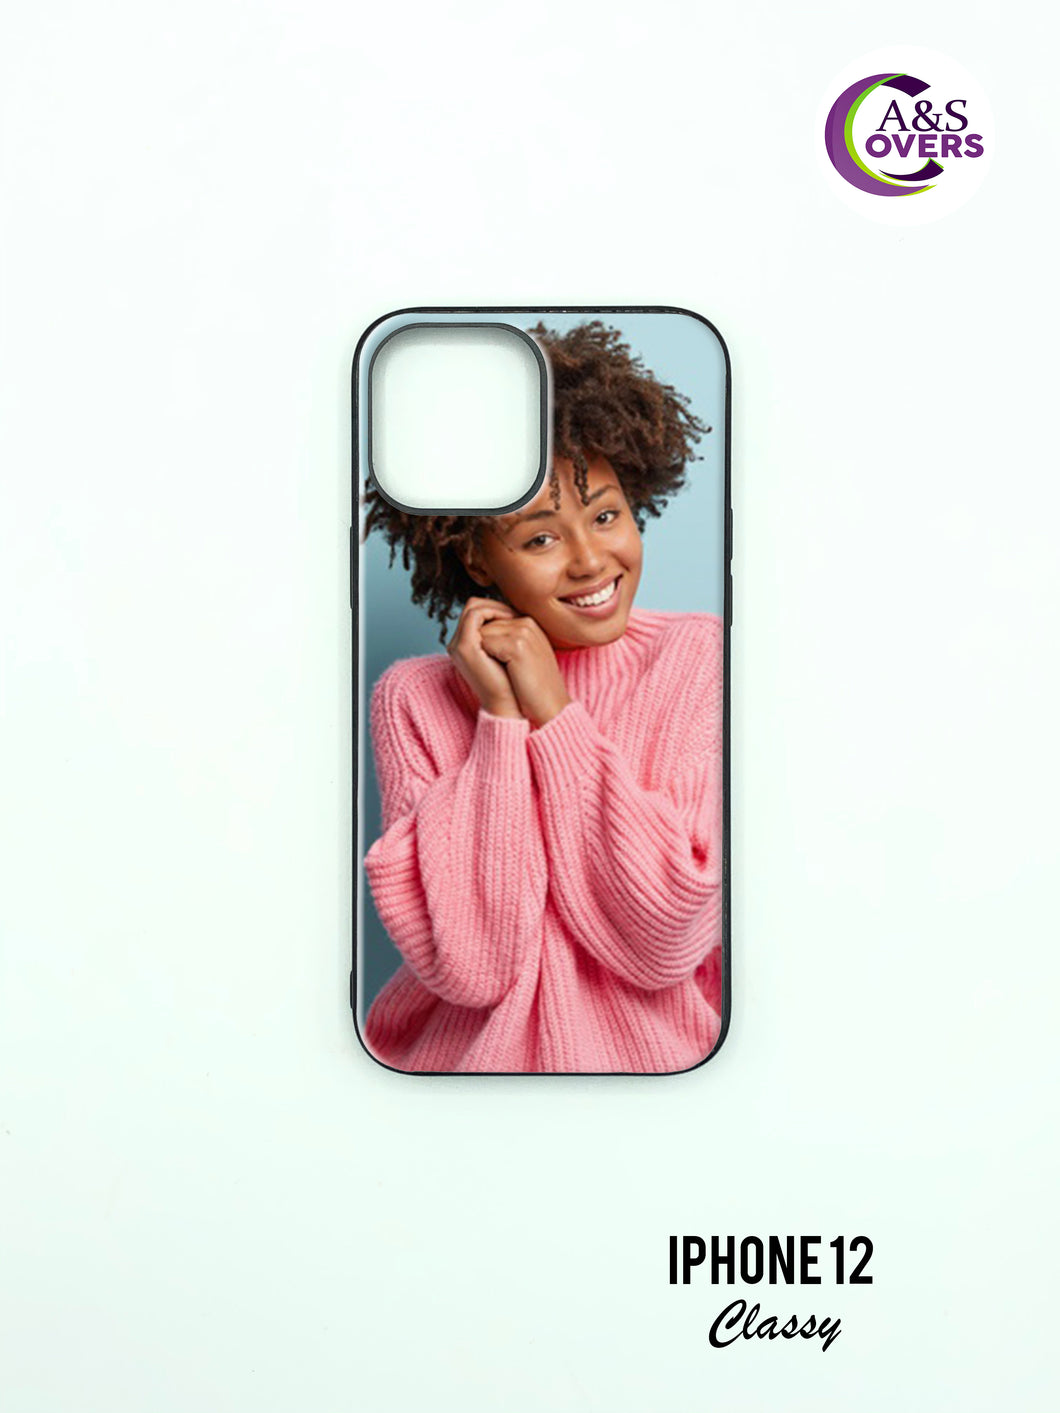 iPhone 12 Classy - A&S Covers